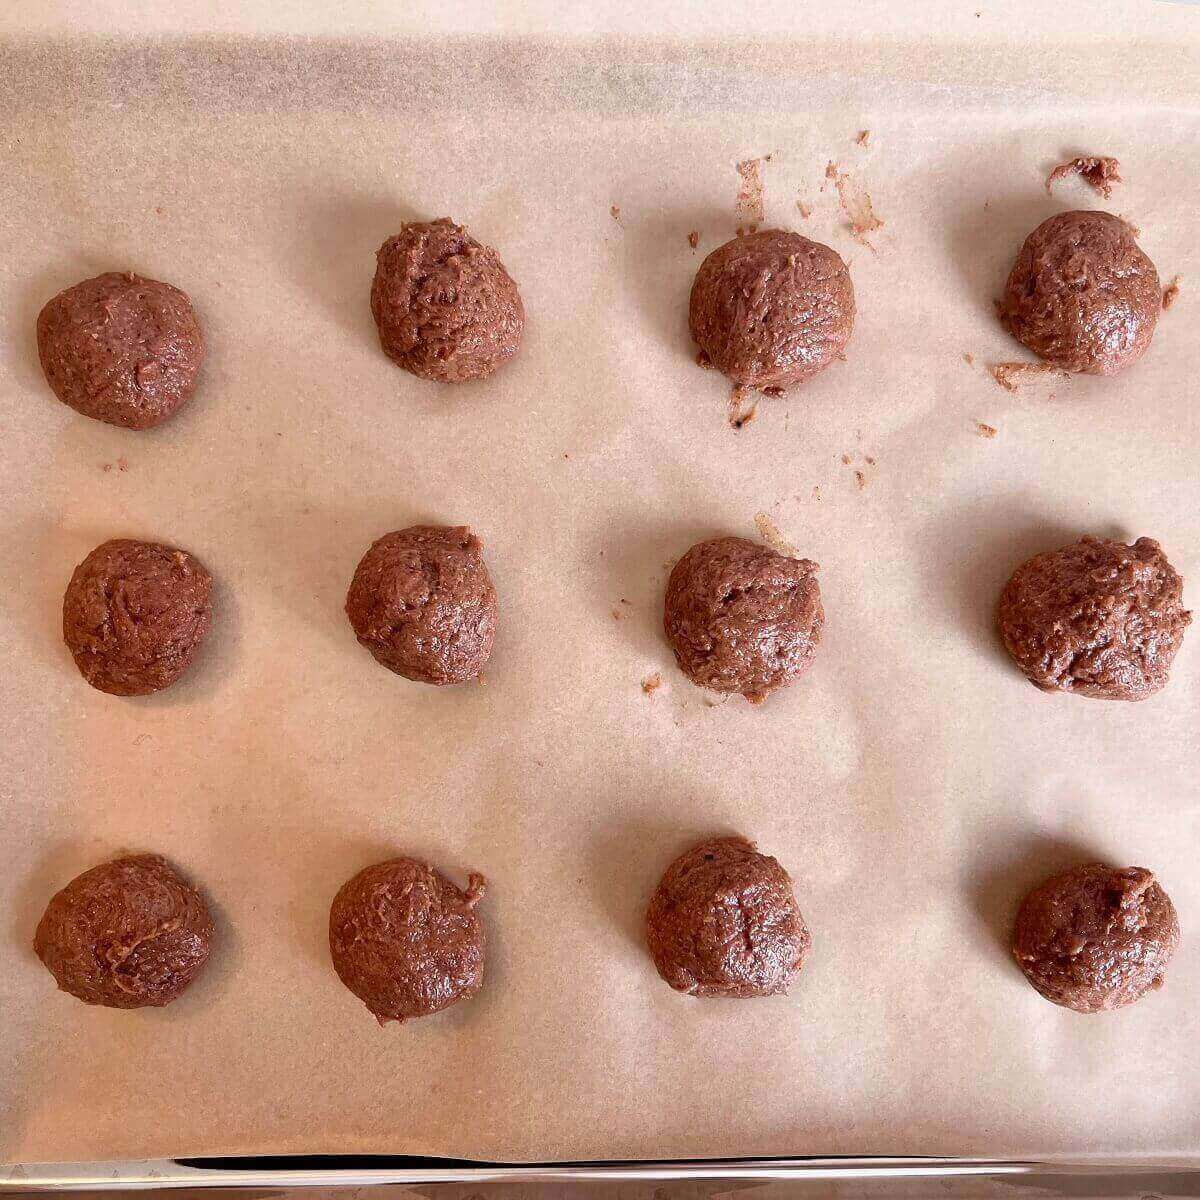 Strawberry dough balls on a sheet pan lined with parchment paper.